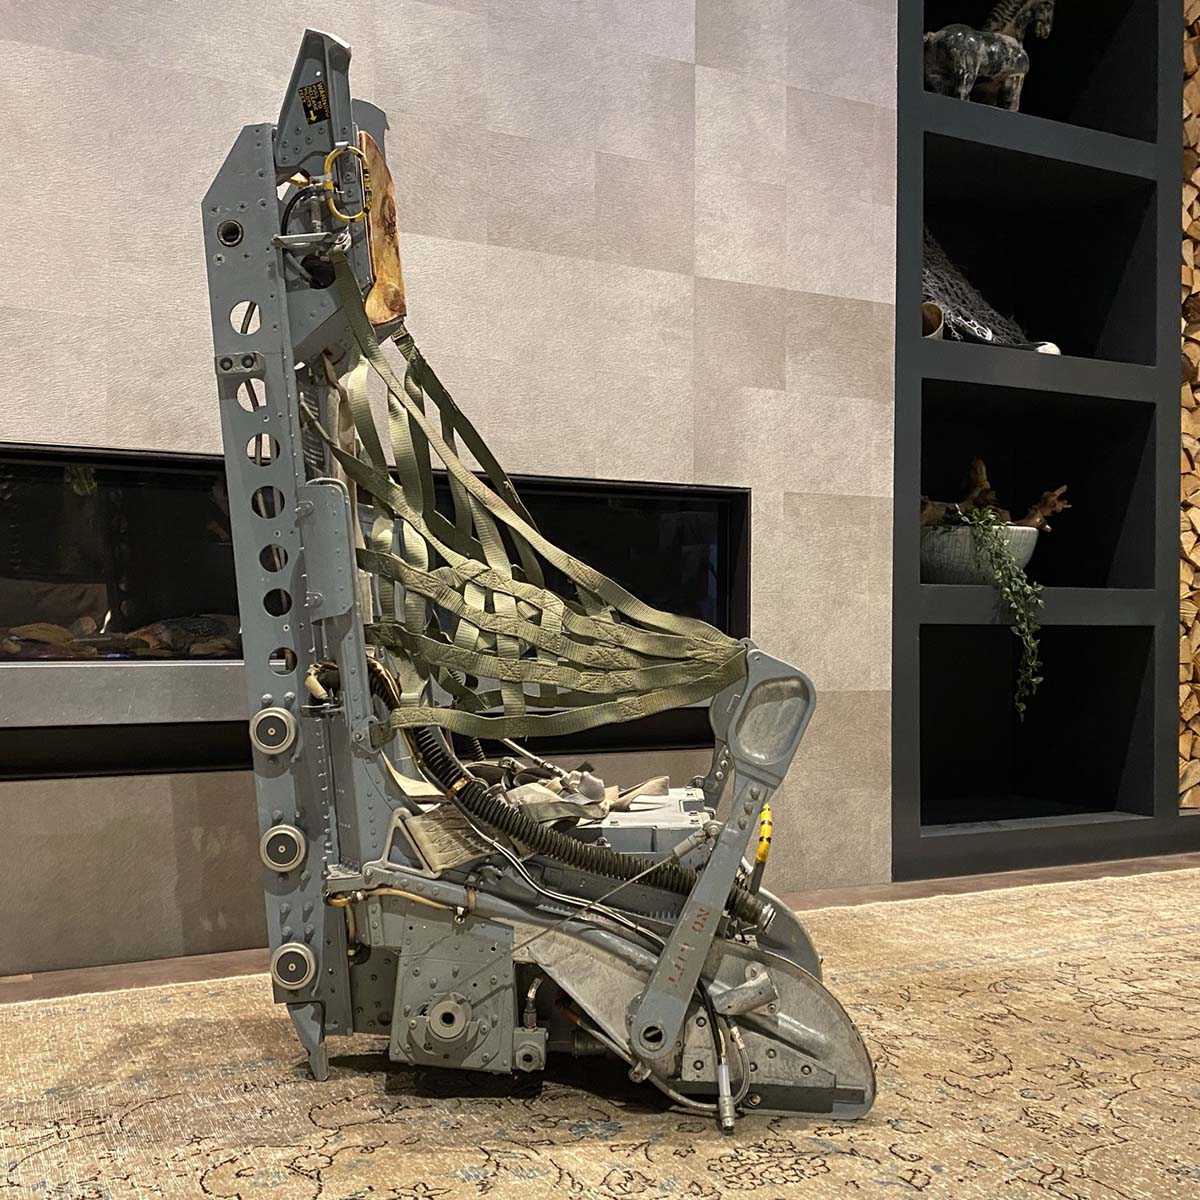 Lockheed Ejection seat in front of fireplace.